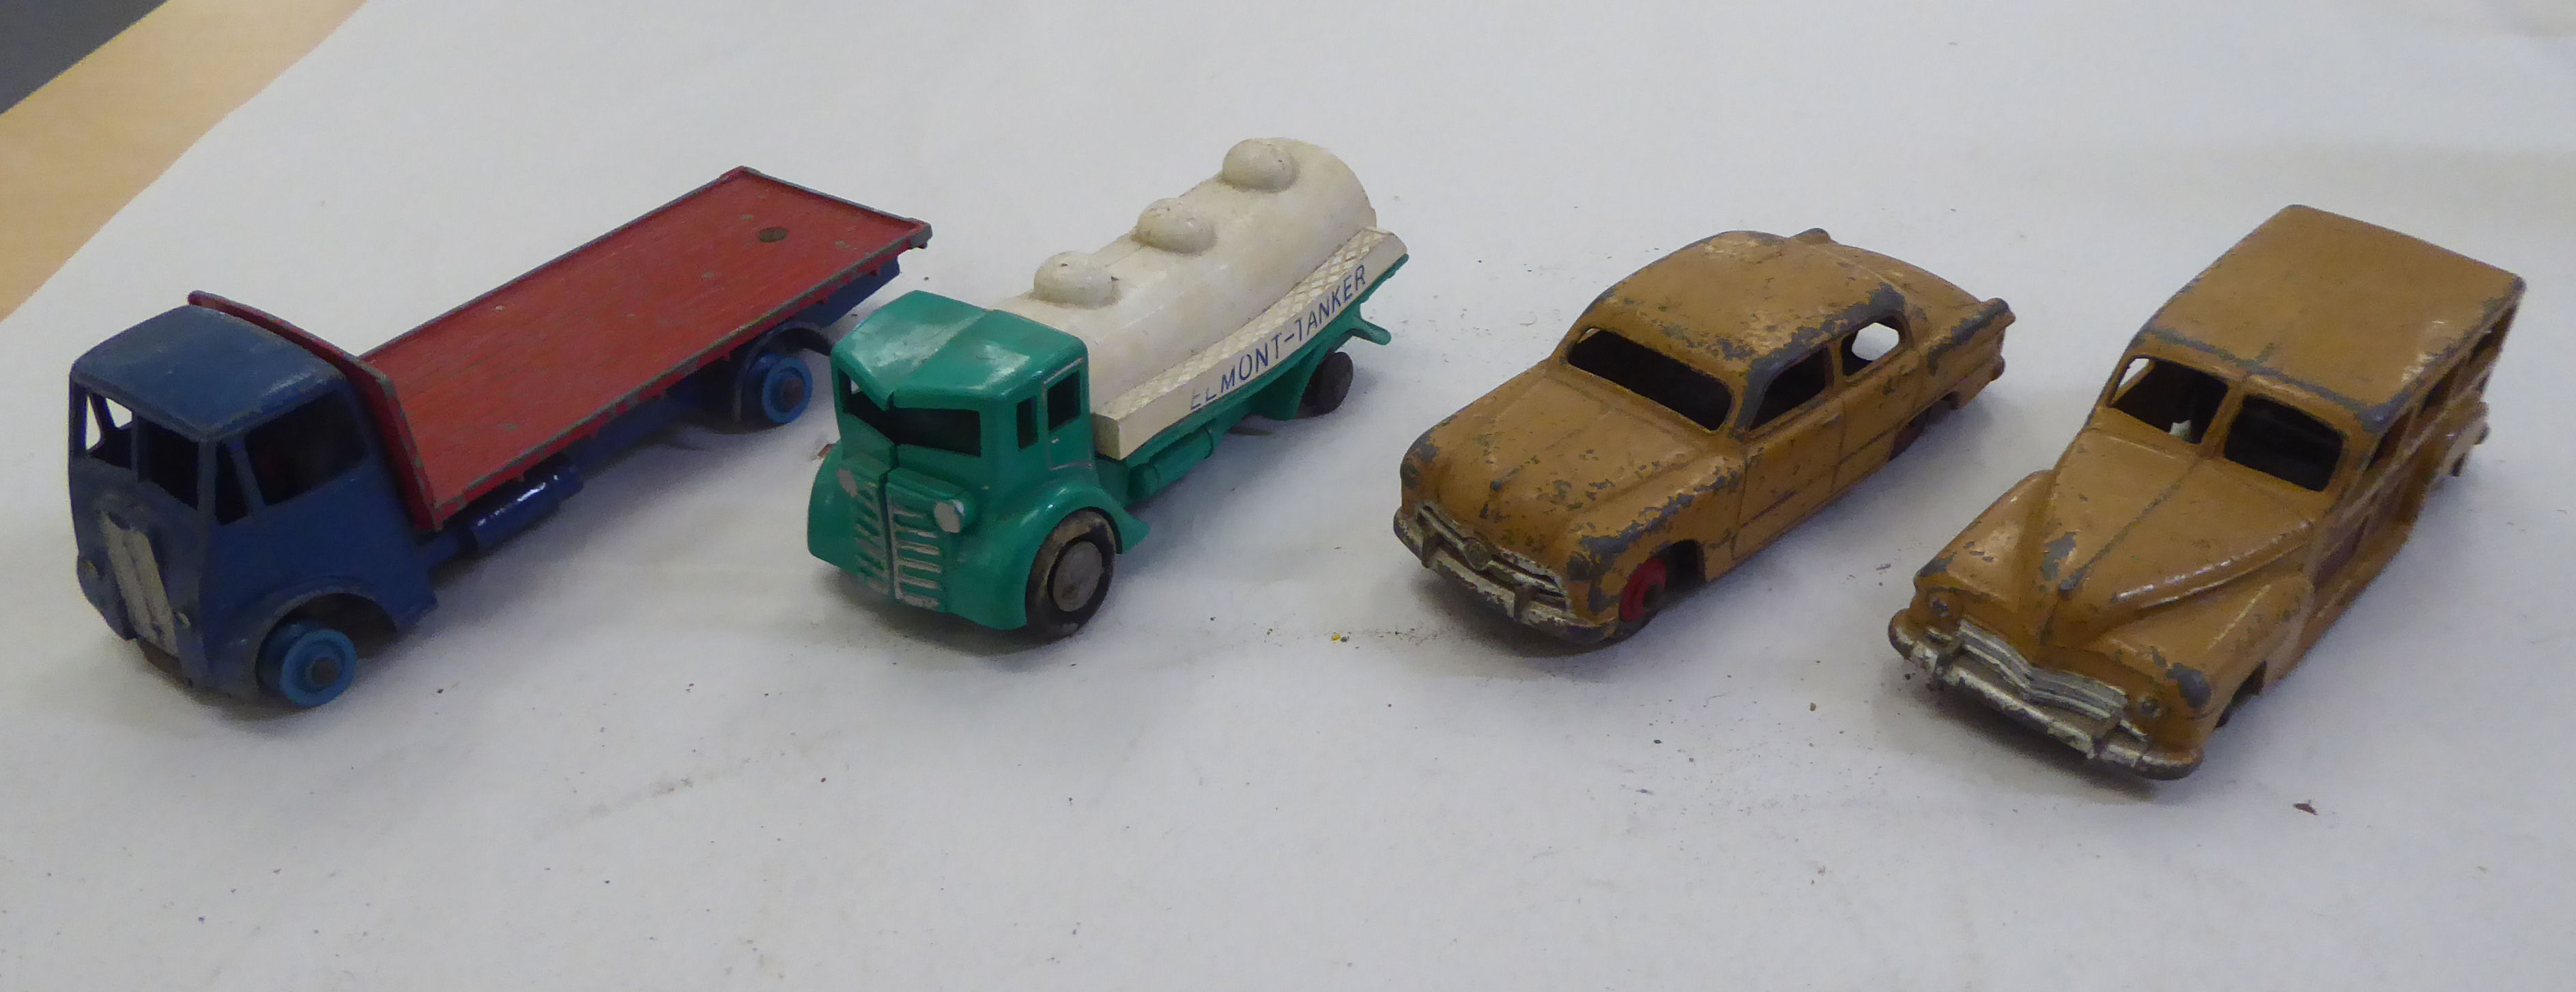 Diecast model vehicles: to include examples by Schuco and Dinky Toys, featuring a Ford Sedan - Image 3 of 7